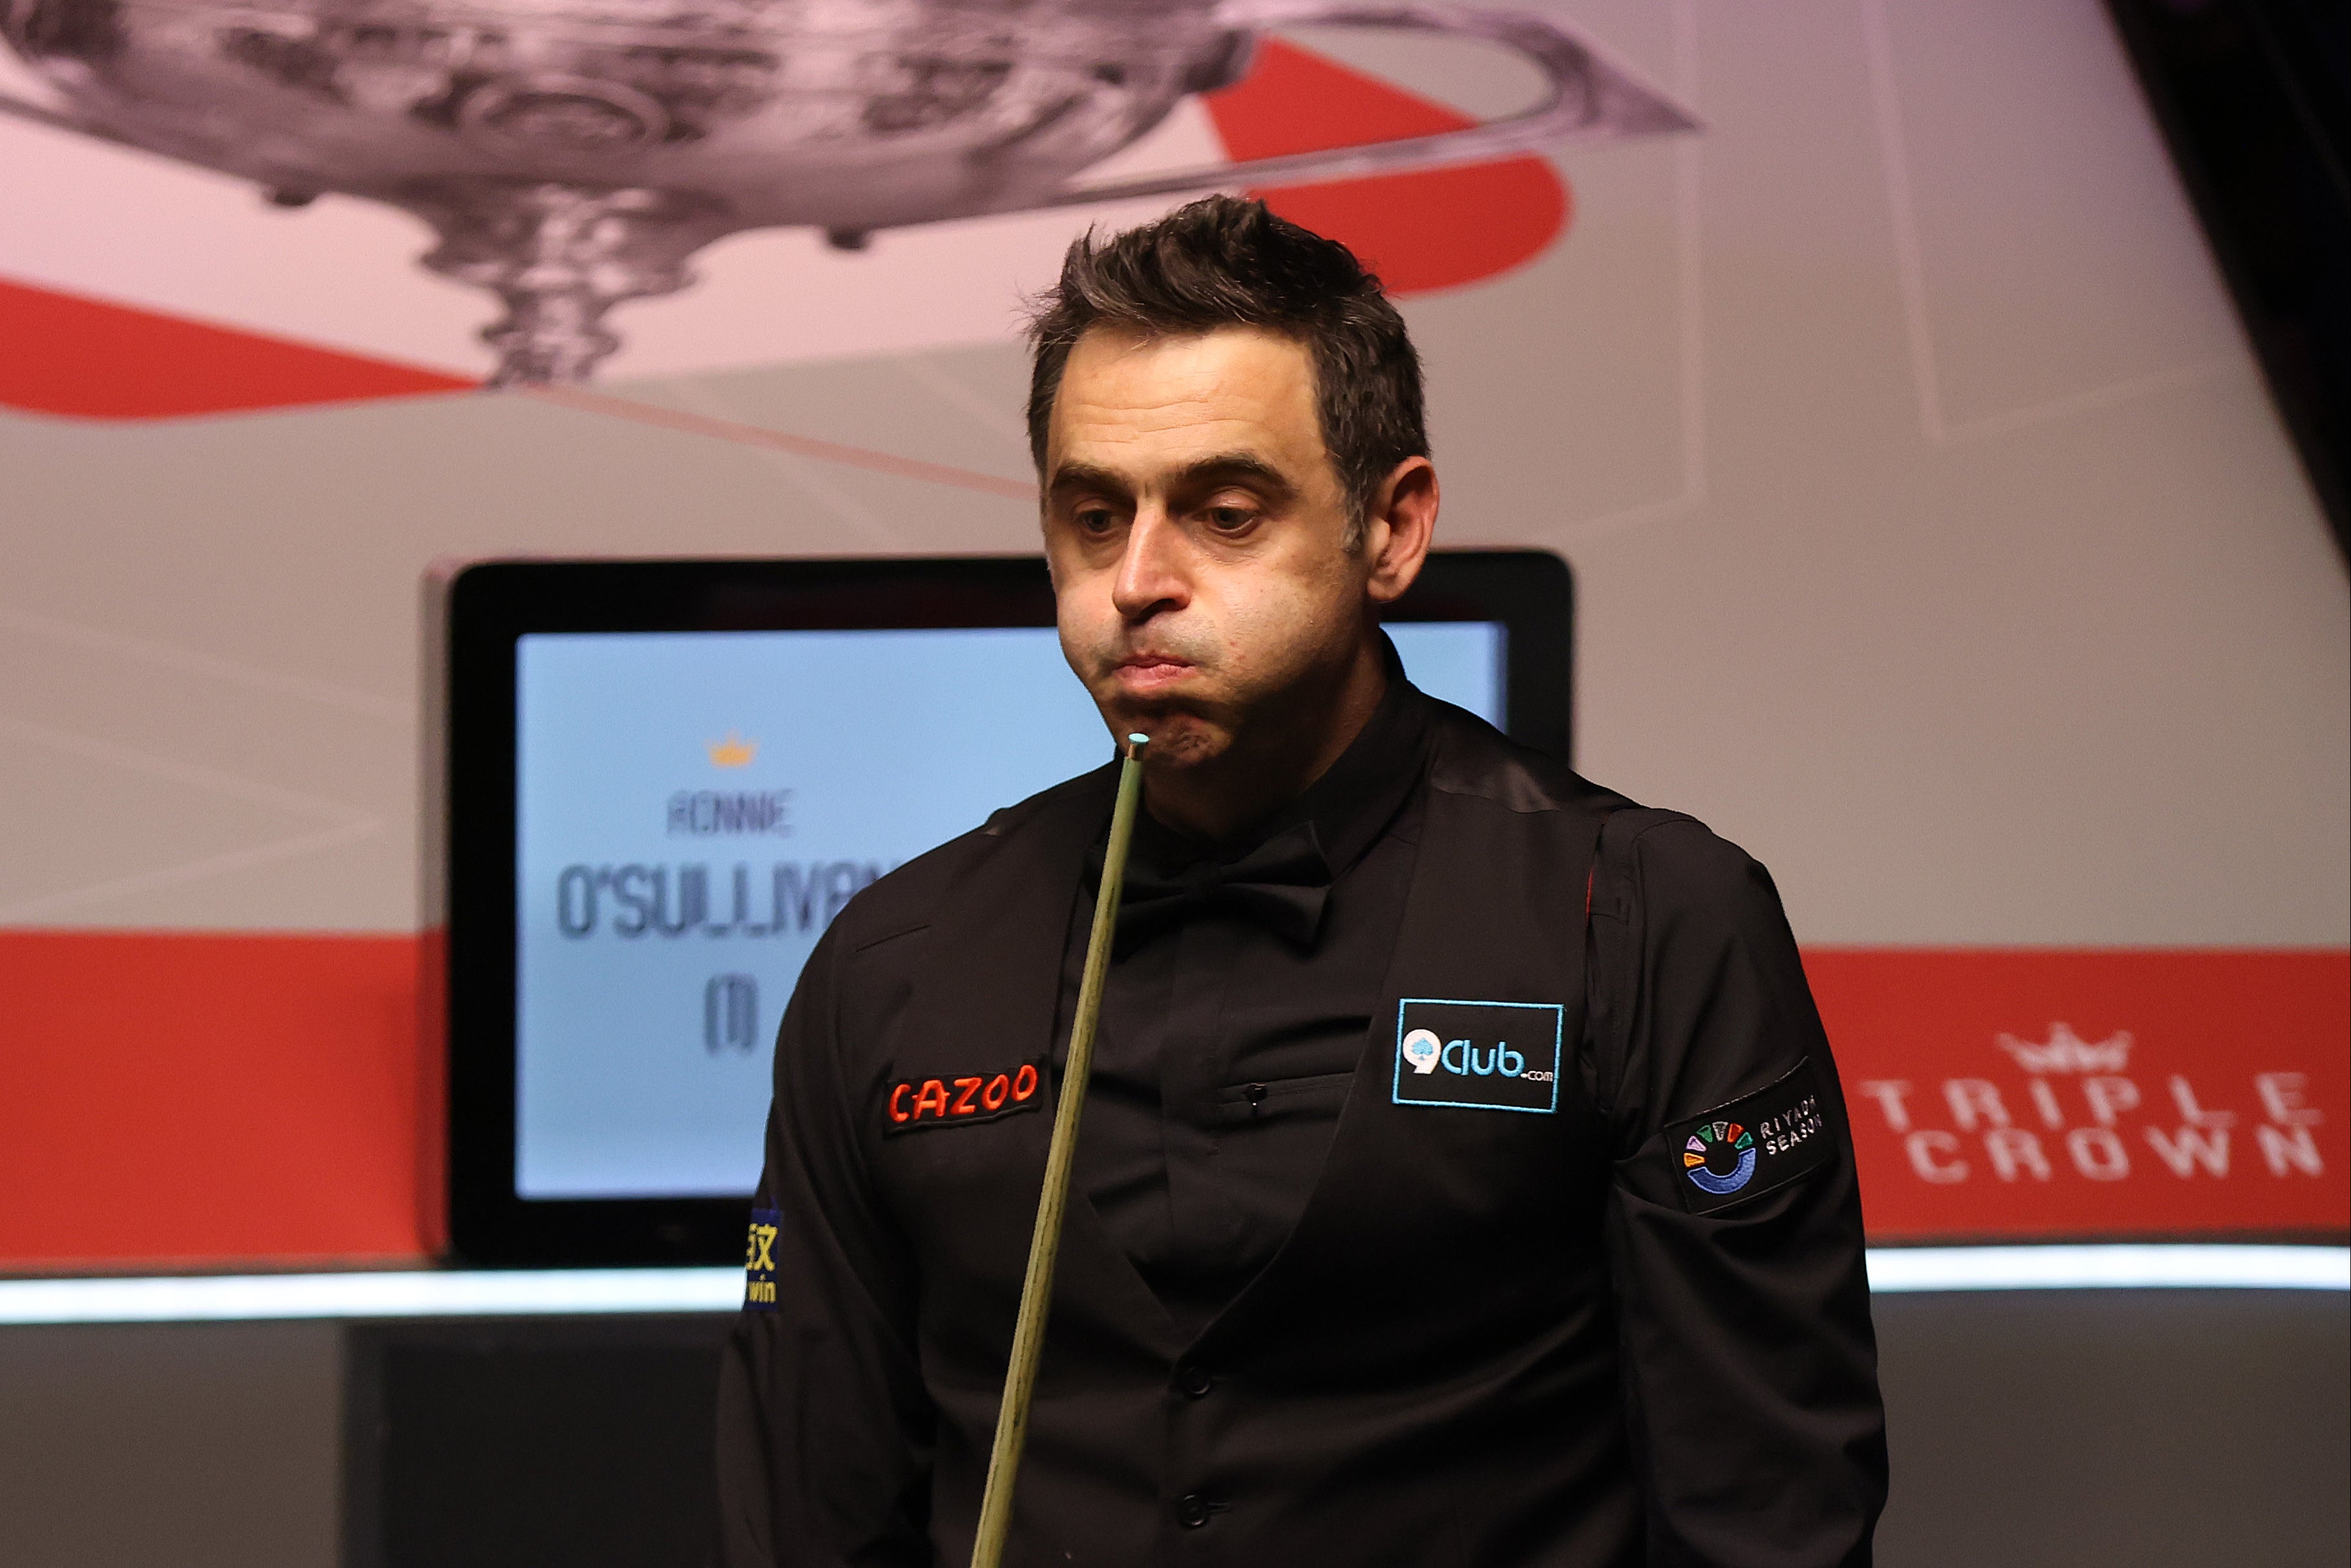 World Snooker - Ronnie O’Sullivan's Disappointment